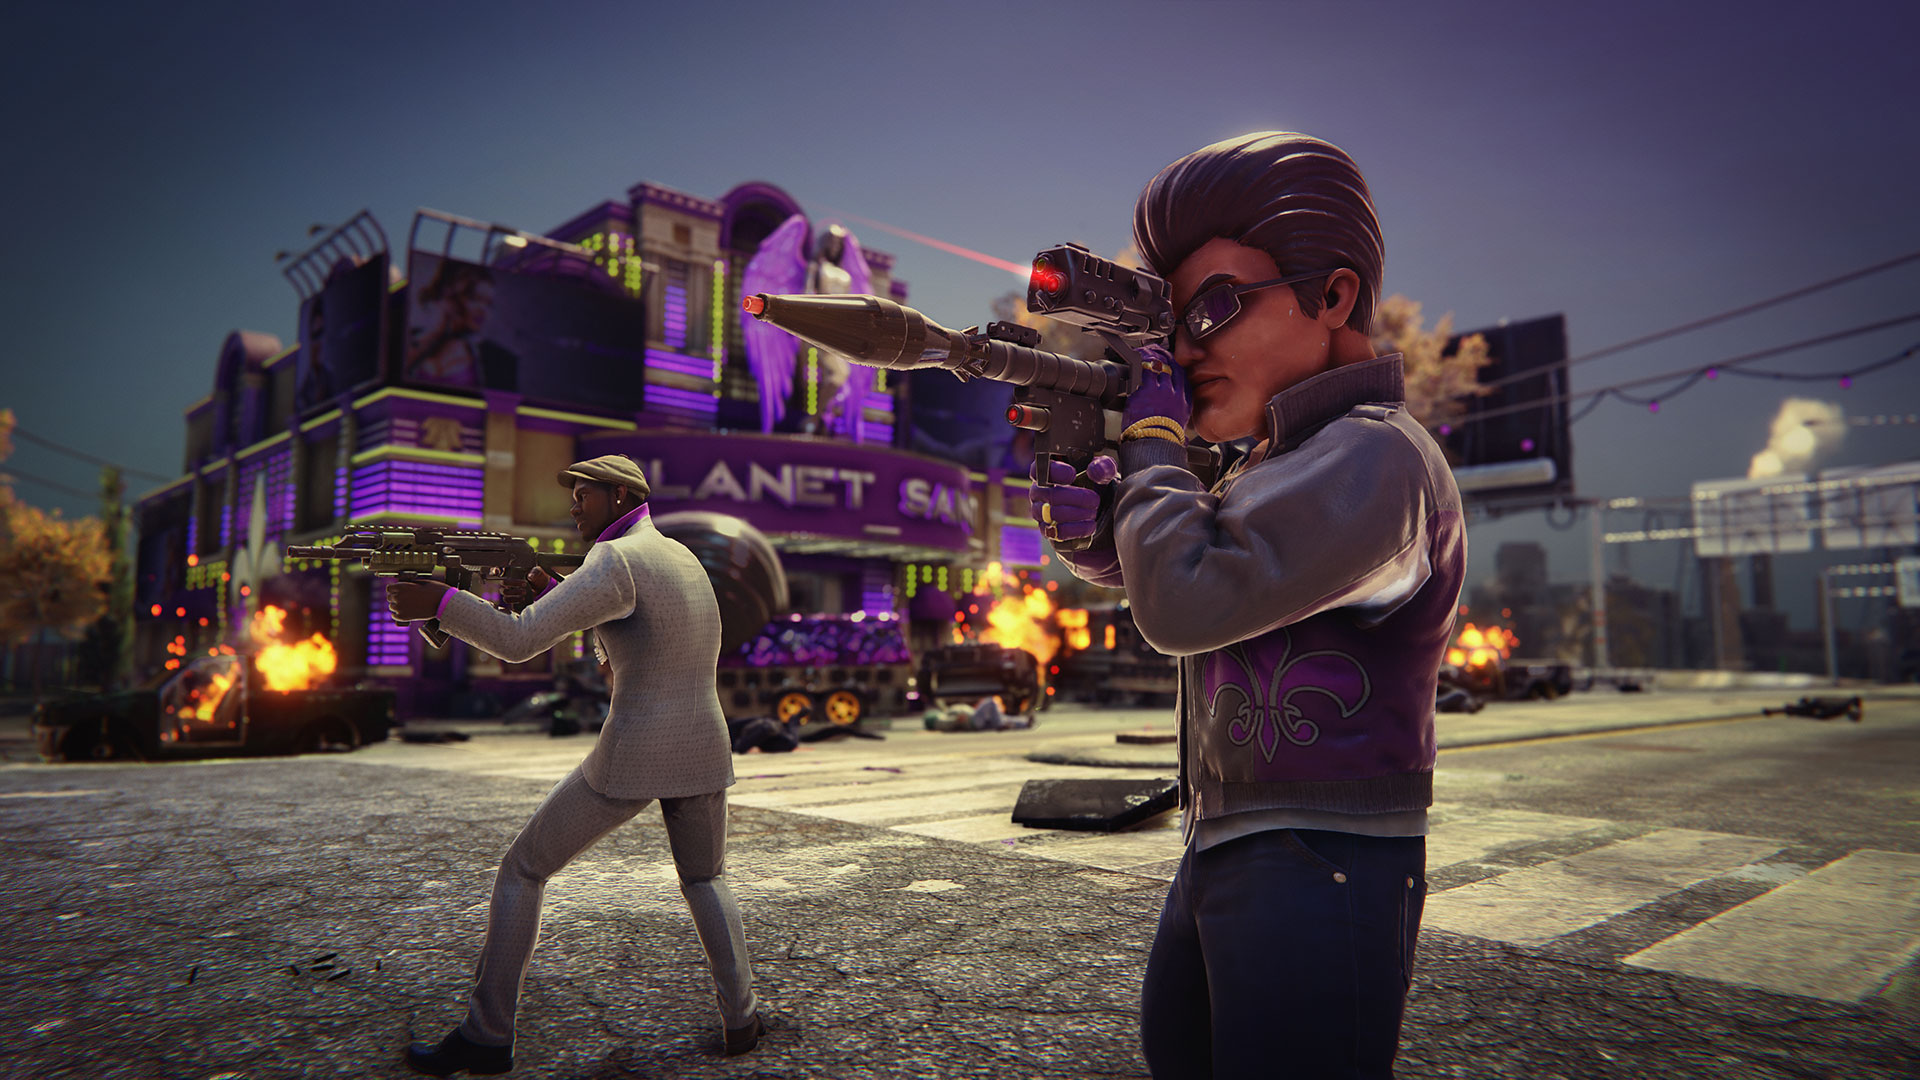 Saints Row 3 Remastered Review - IGN